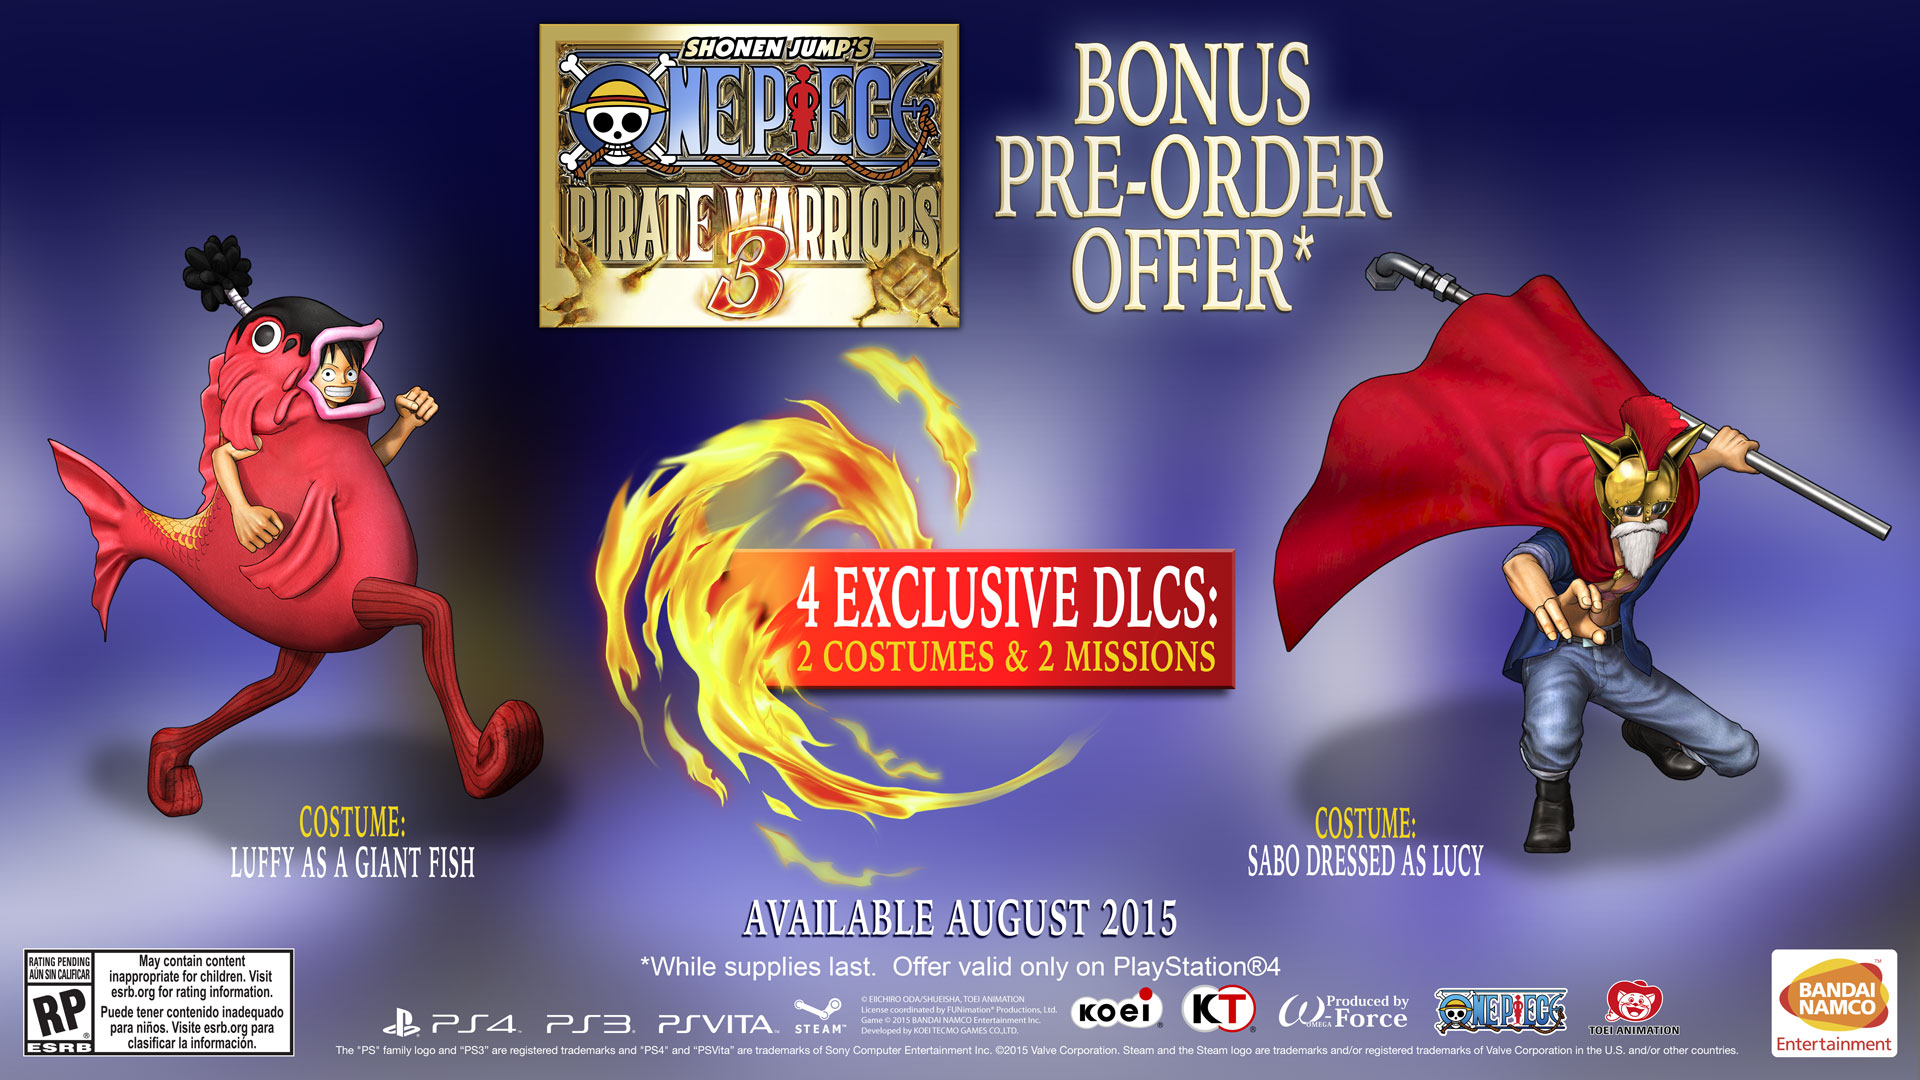 ONE PIECE PIRATE WARRIORS 3 Gold Edition on Steam